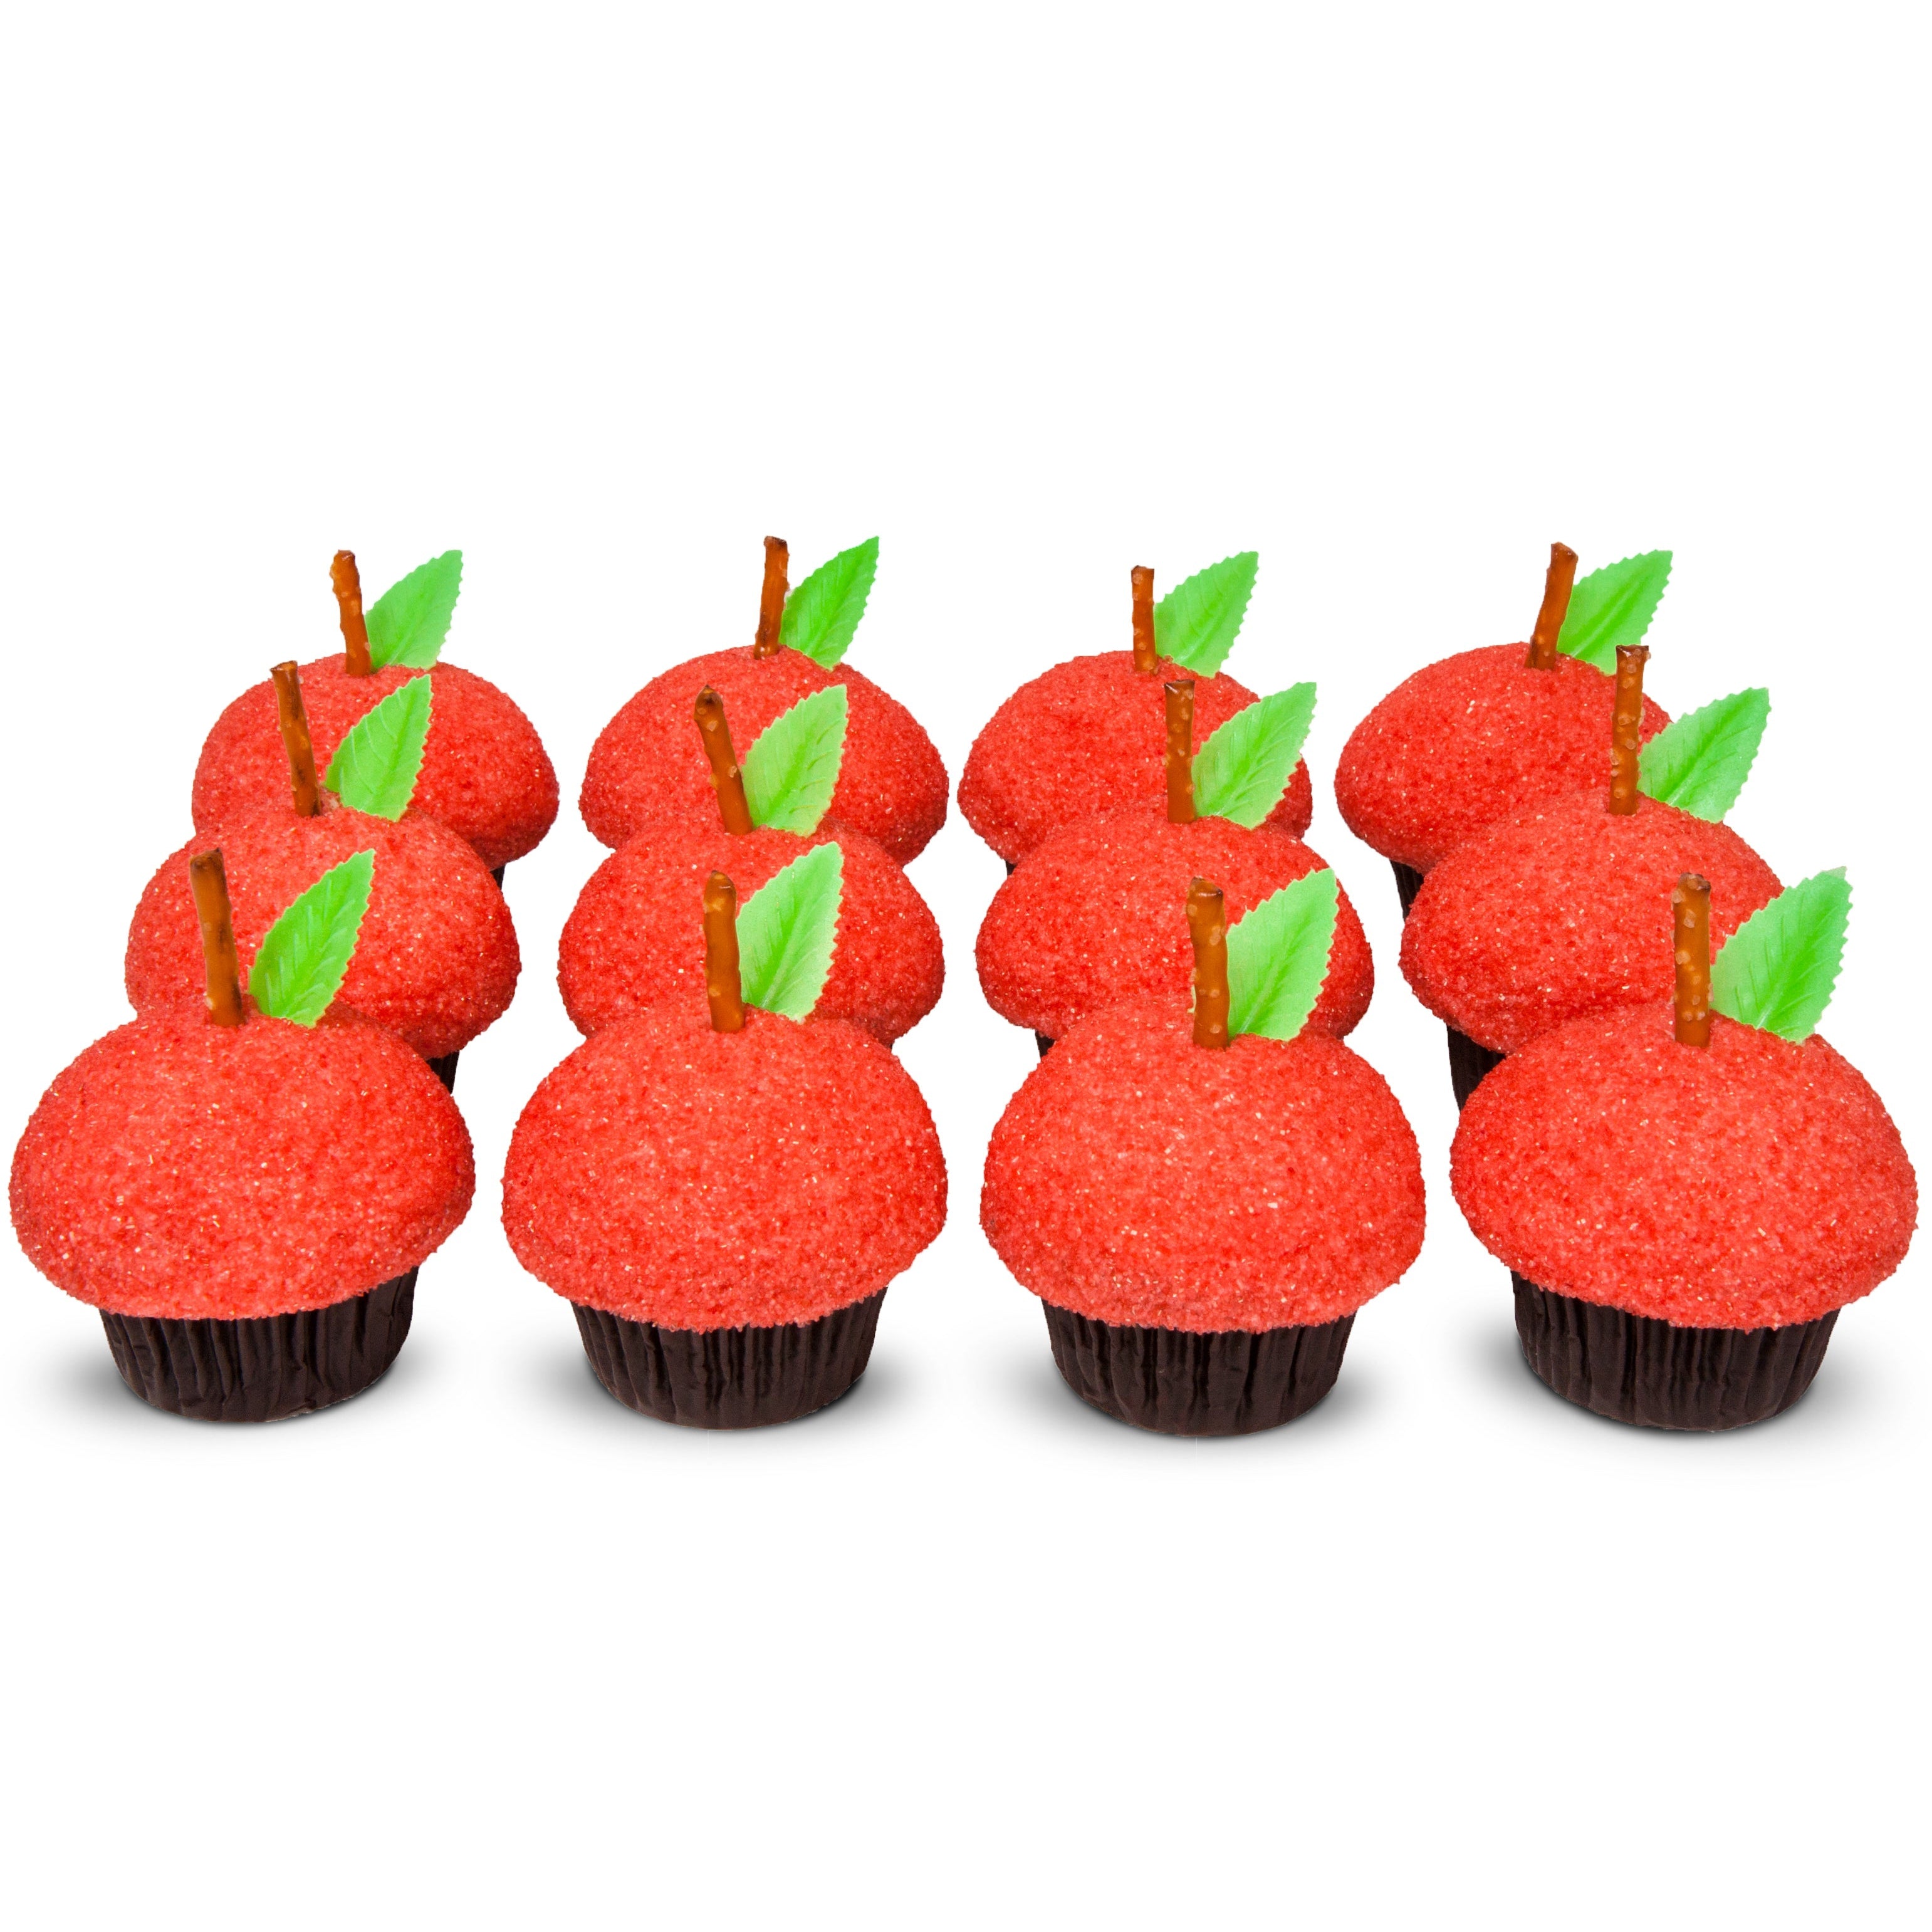 Cupcakes with Cupcake Toppers (One Dozen)